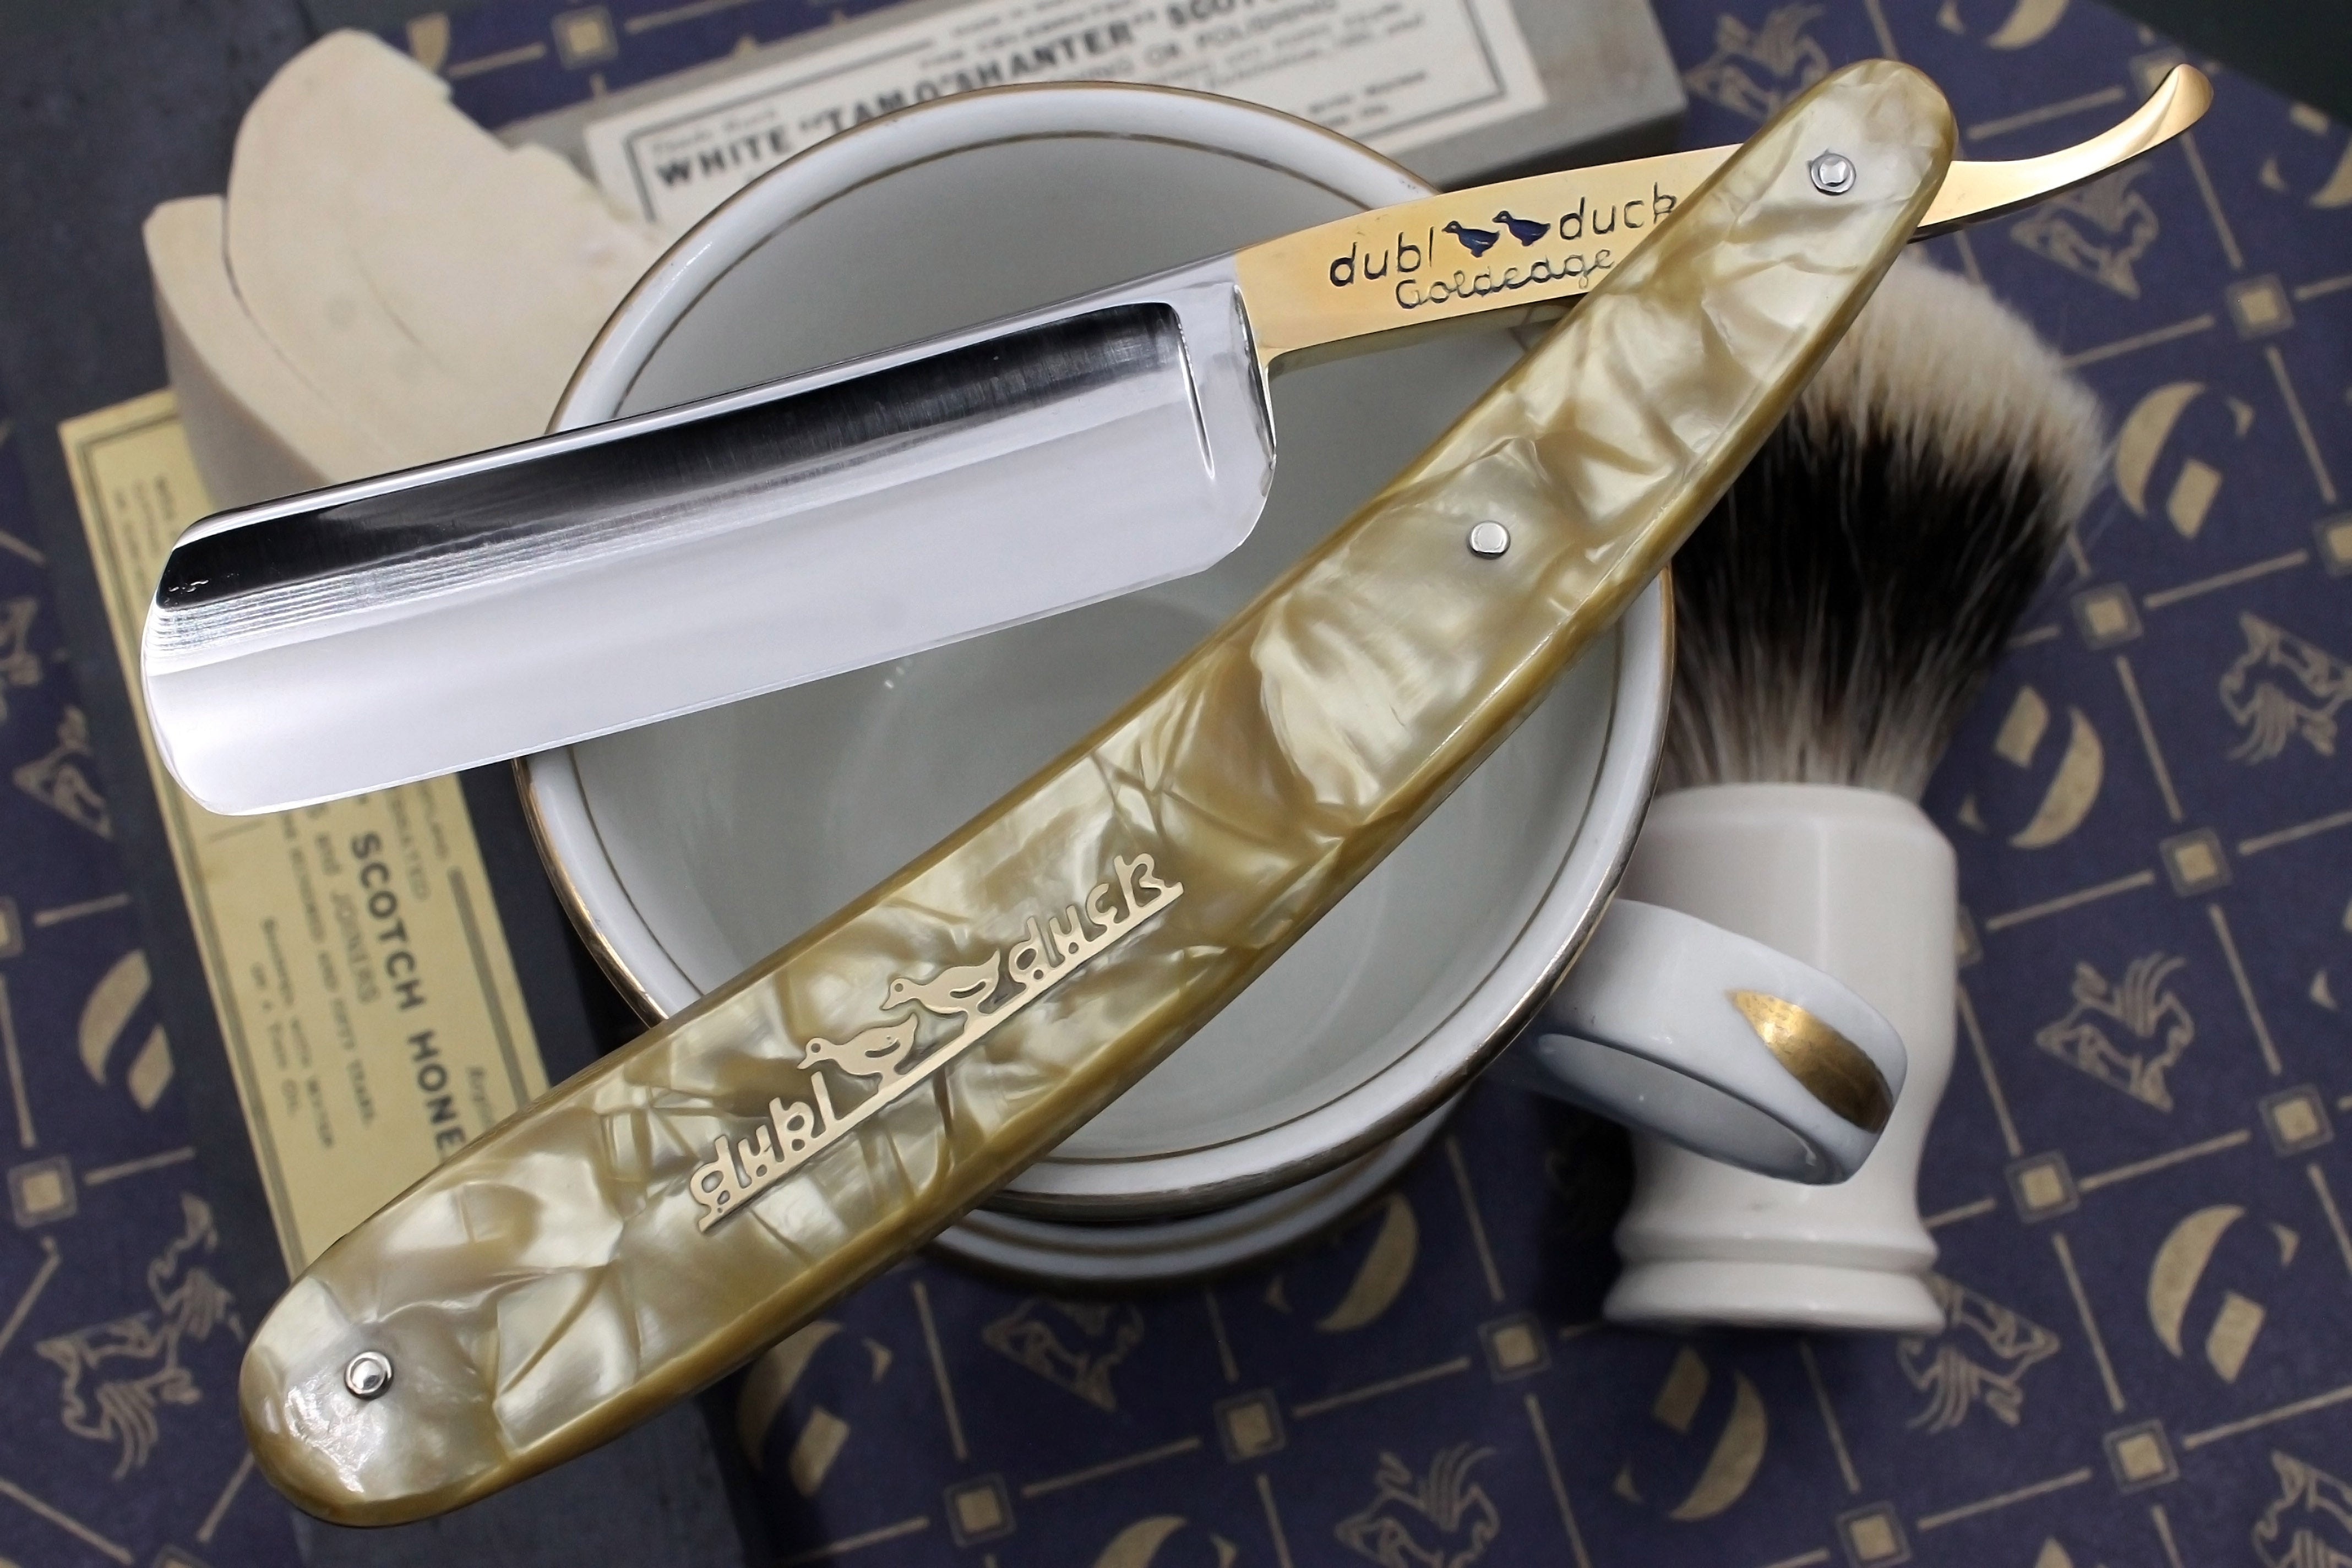 Dubl Duck Goldedge 7/8 Blade Cracked Ice Scales - Fully Restored Vintage Solingen Straight Razor - Shave Ready